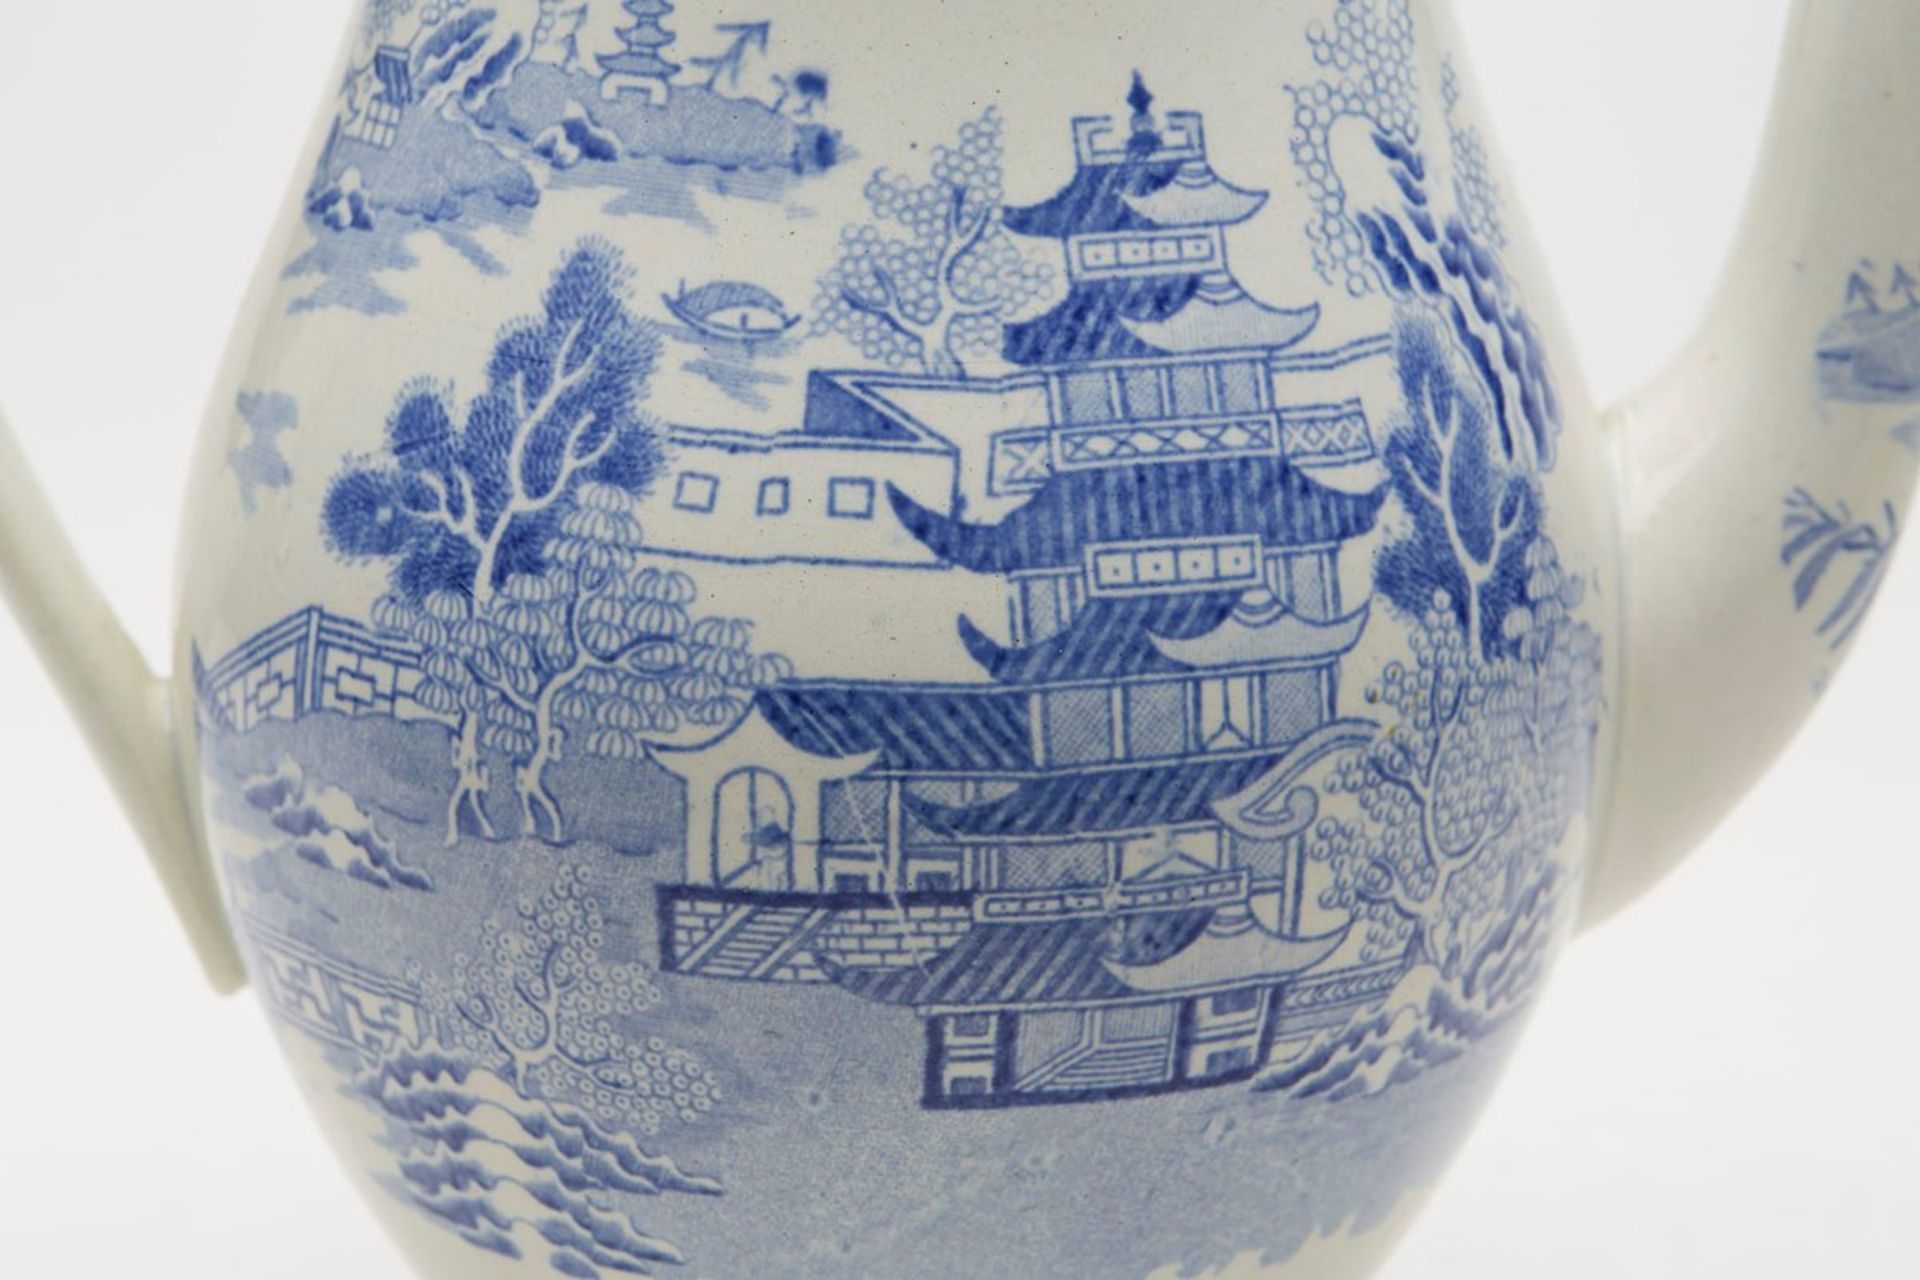 ANTIQUE ENGLISH CHINOISERIE BLUE & WHITE TEAPOT 19TH C.   DIMENSIONS   Height 27cm, Width 23,5cm - Image 7 of 10